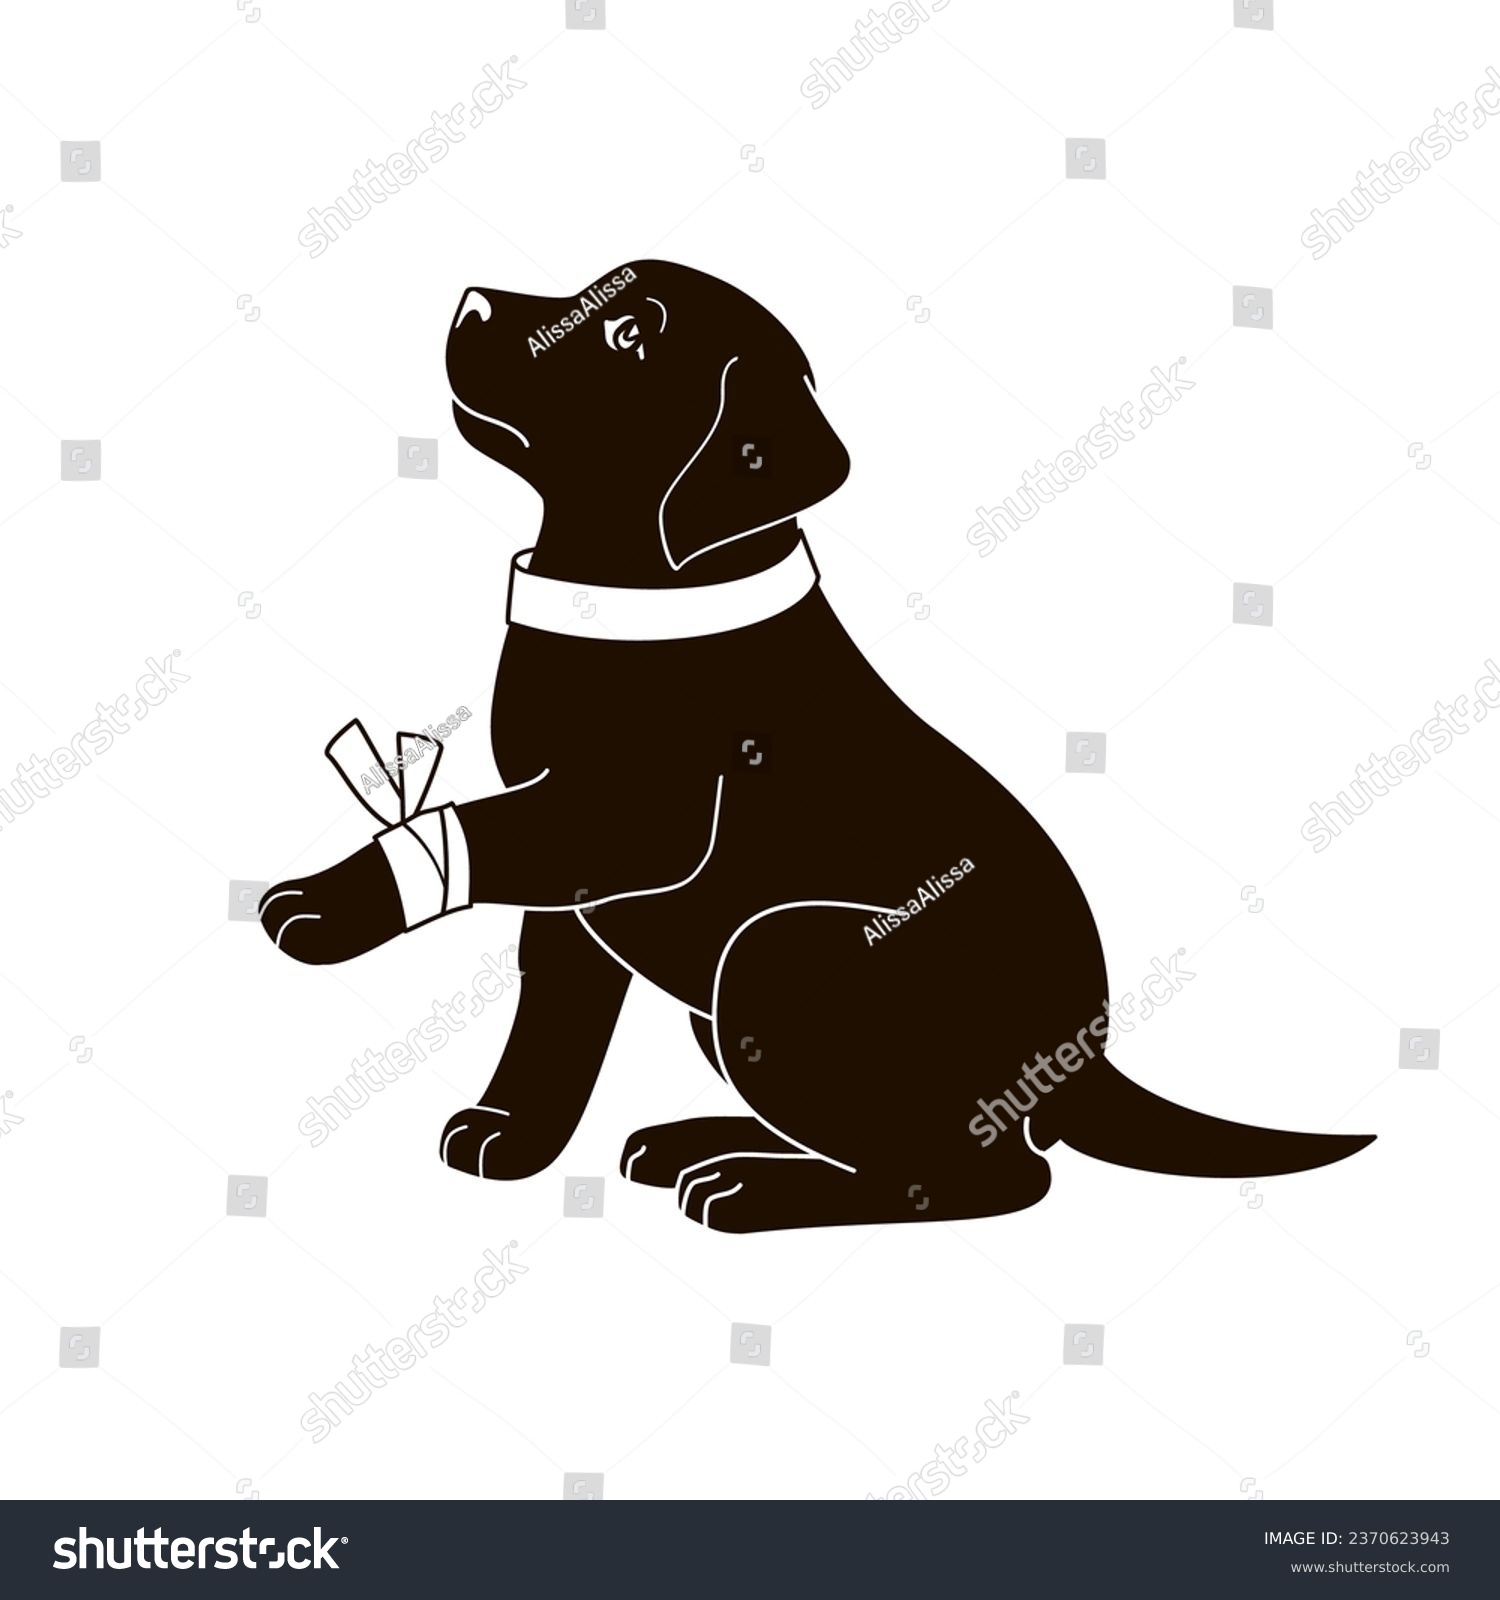 SVG of puppy with a bandaged paw black and white vector illustration svg